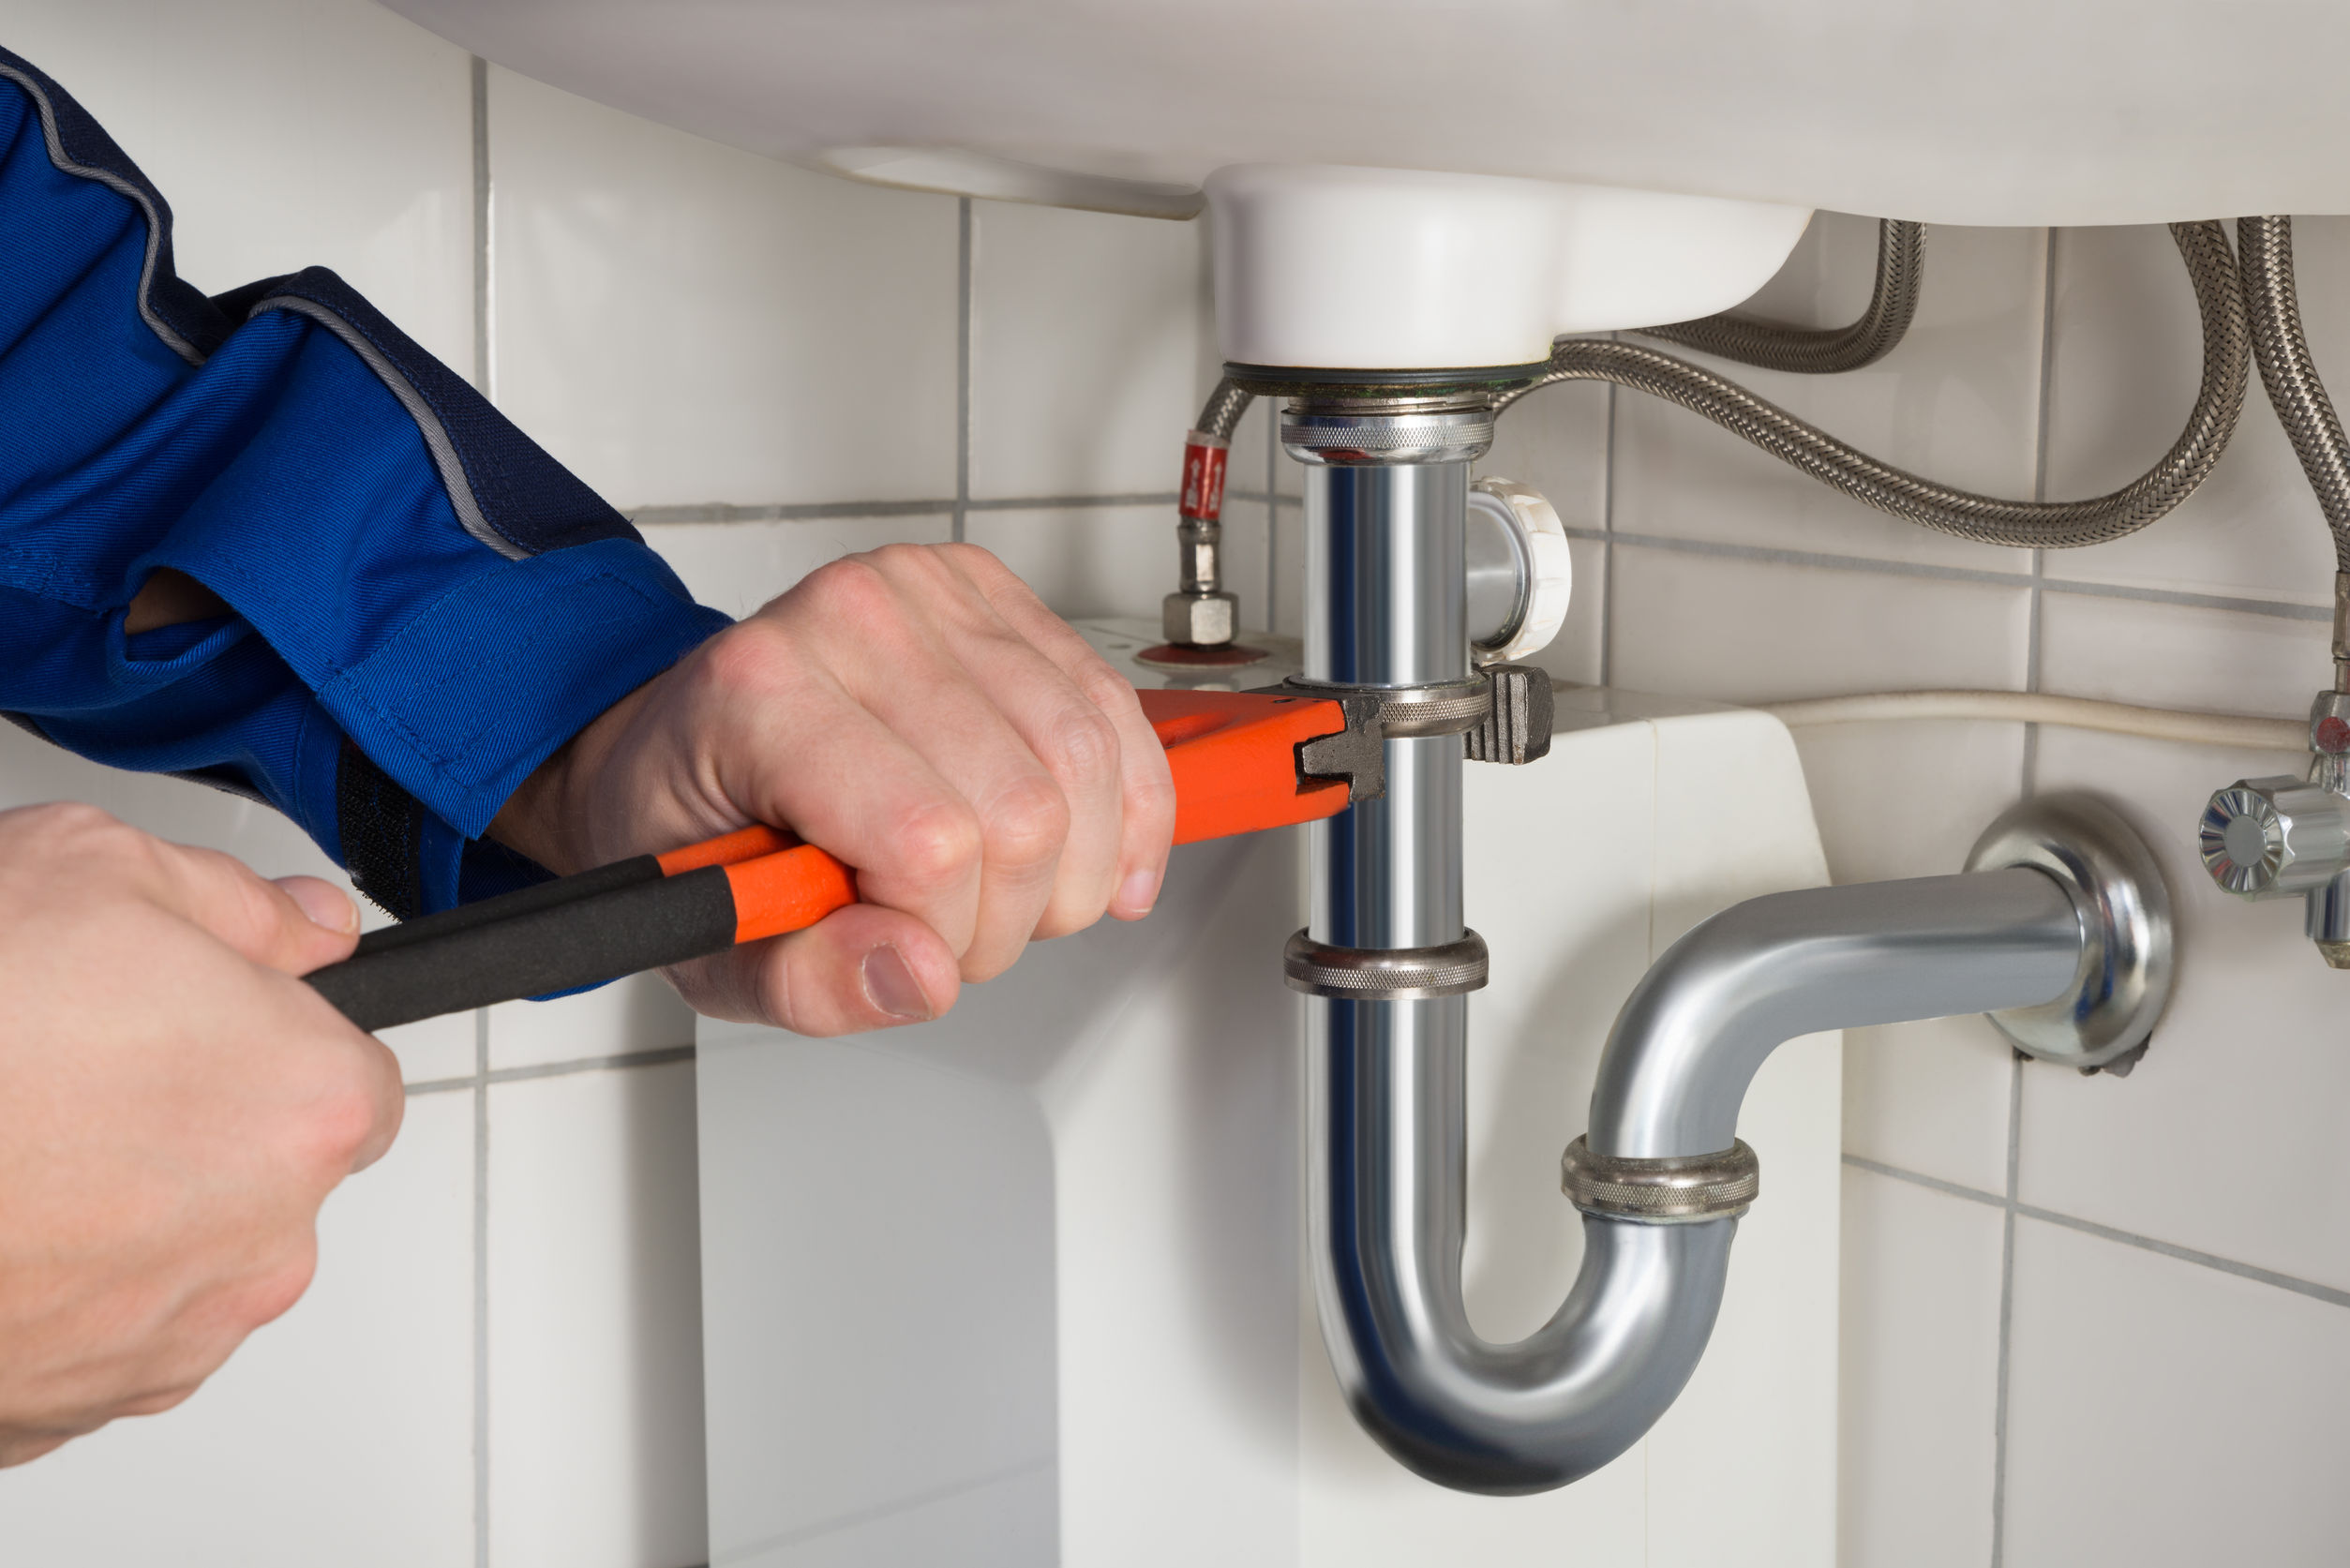 What Services Can You Expect From A Plumber?